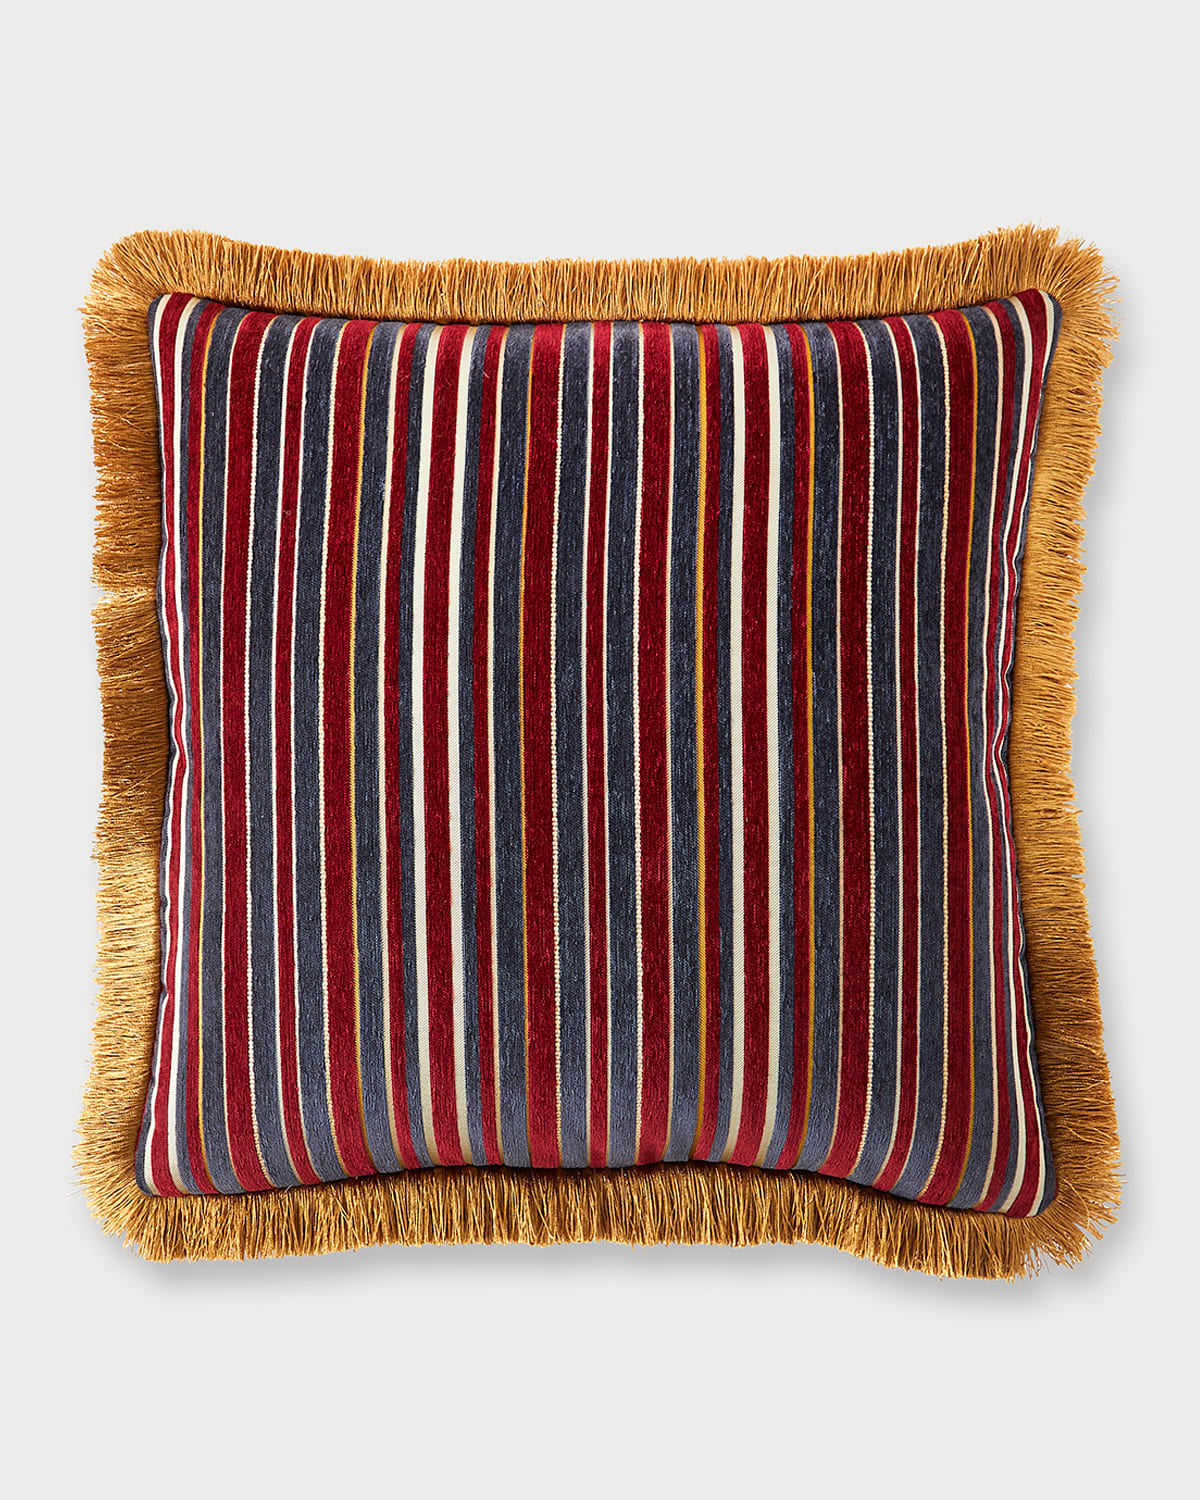 Austin Horn Collection Cantori Striped Pillow, 20"sq. In Multi